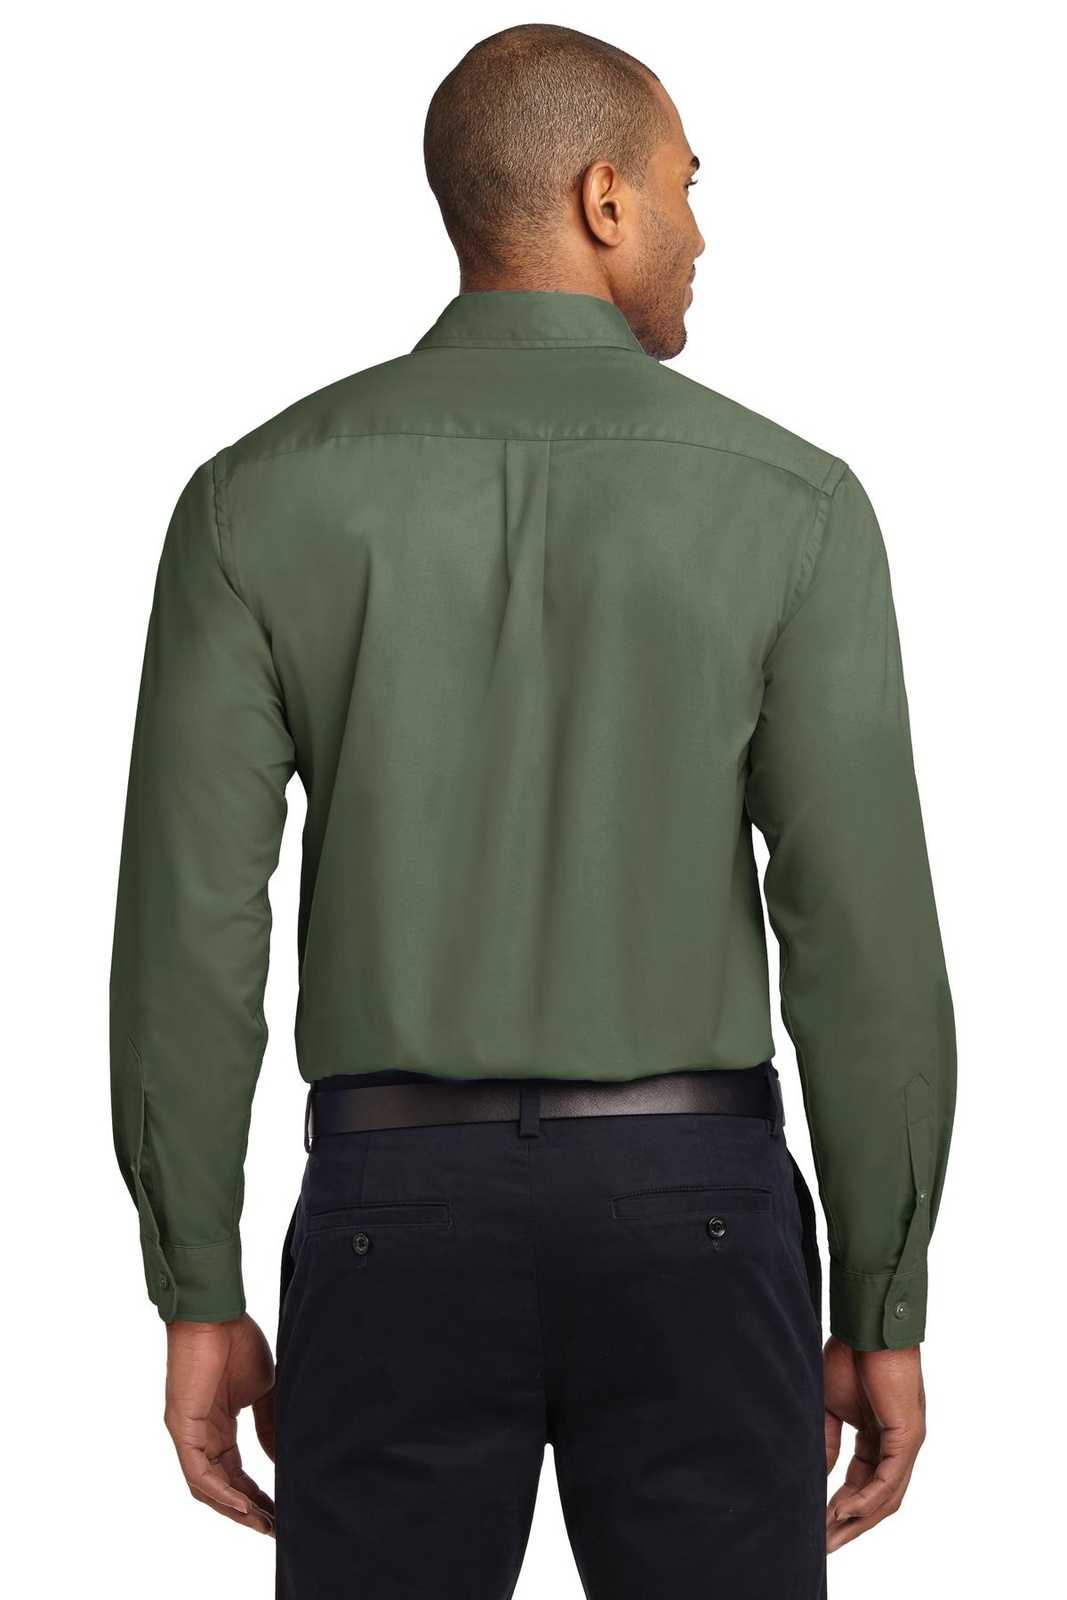 Port Authority S608 Long Sleeve Easy Care Shirt - Clover Green - HIT a Double - 1